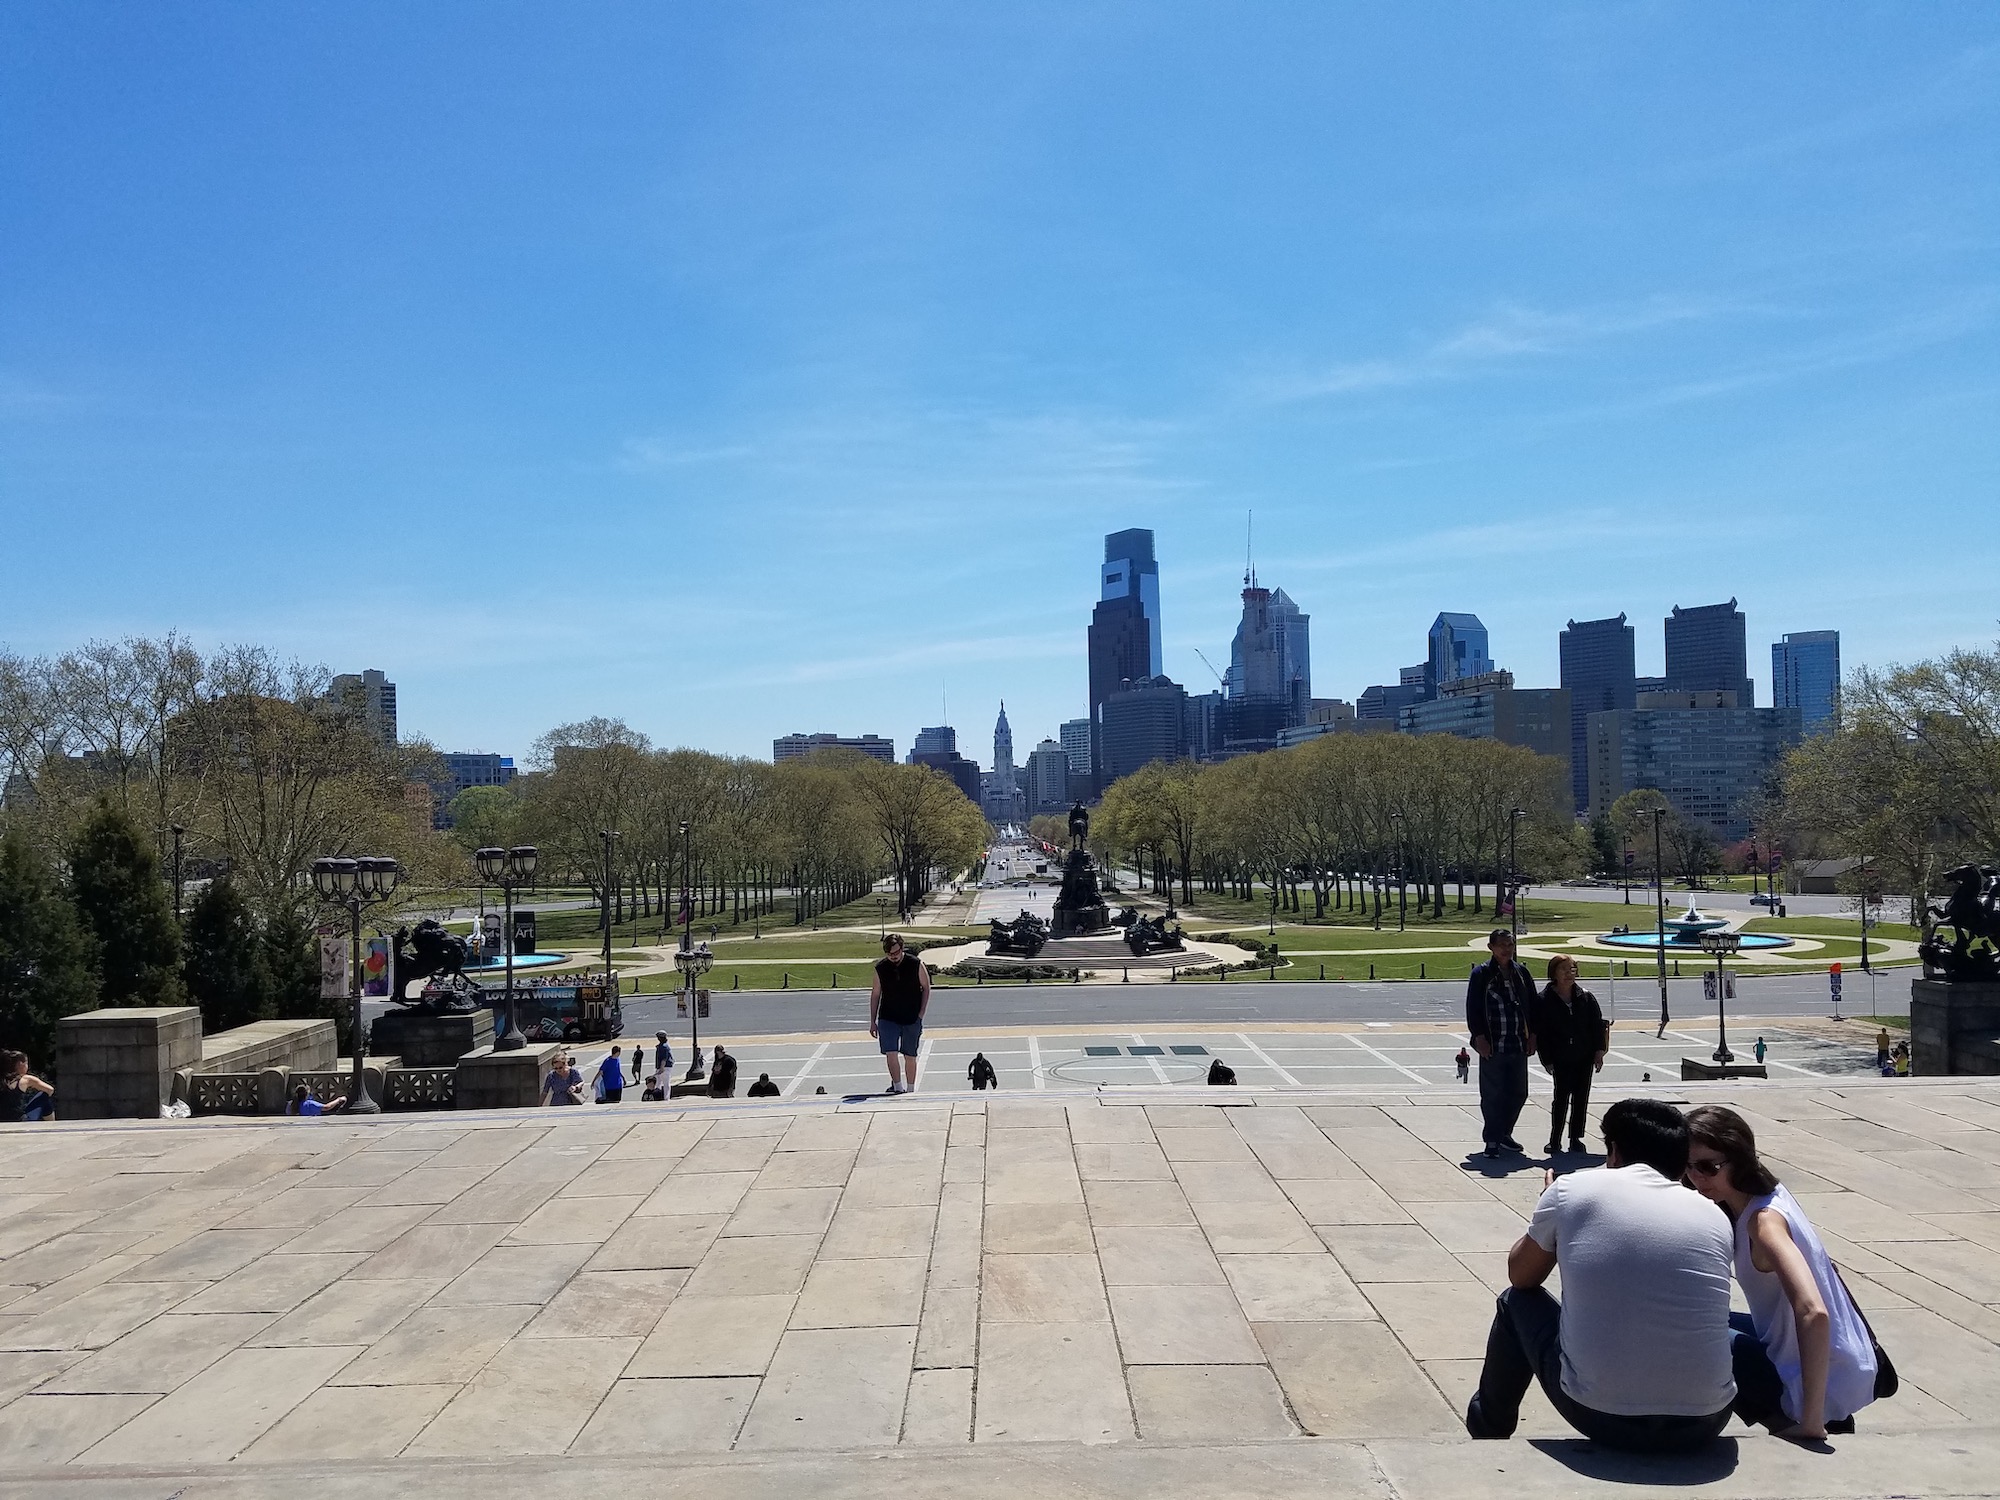 At the top of the Rocky Steps